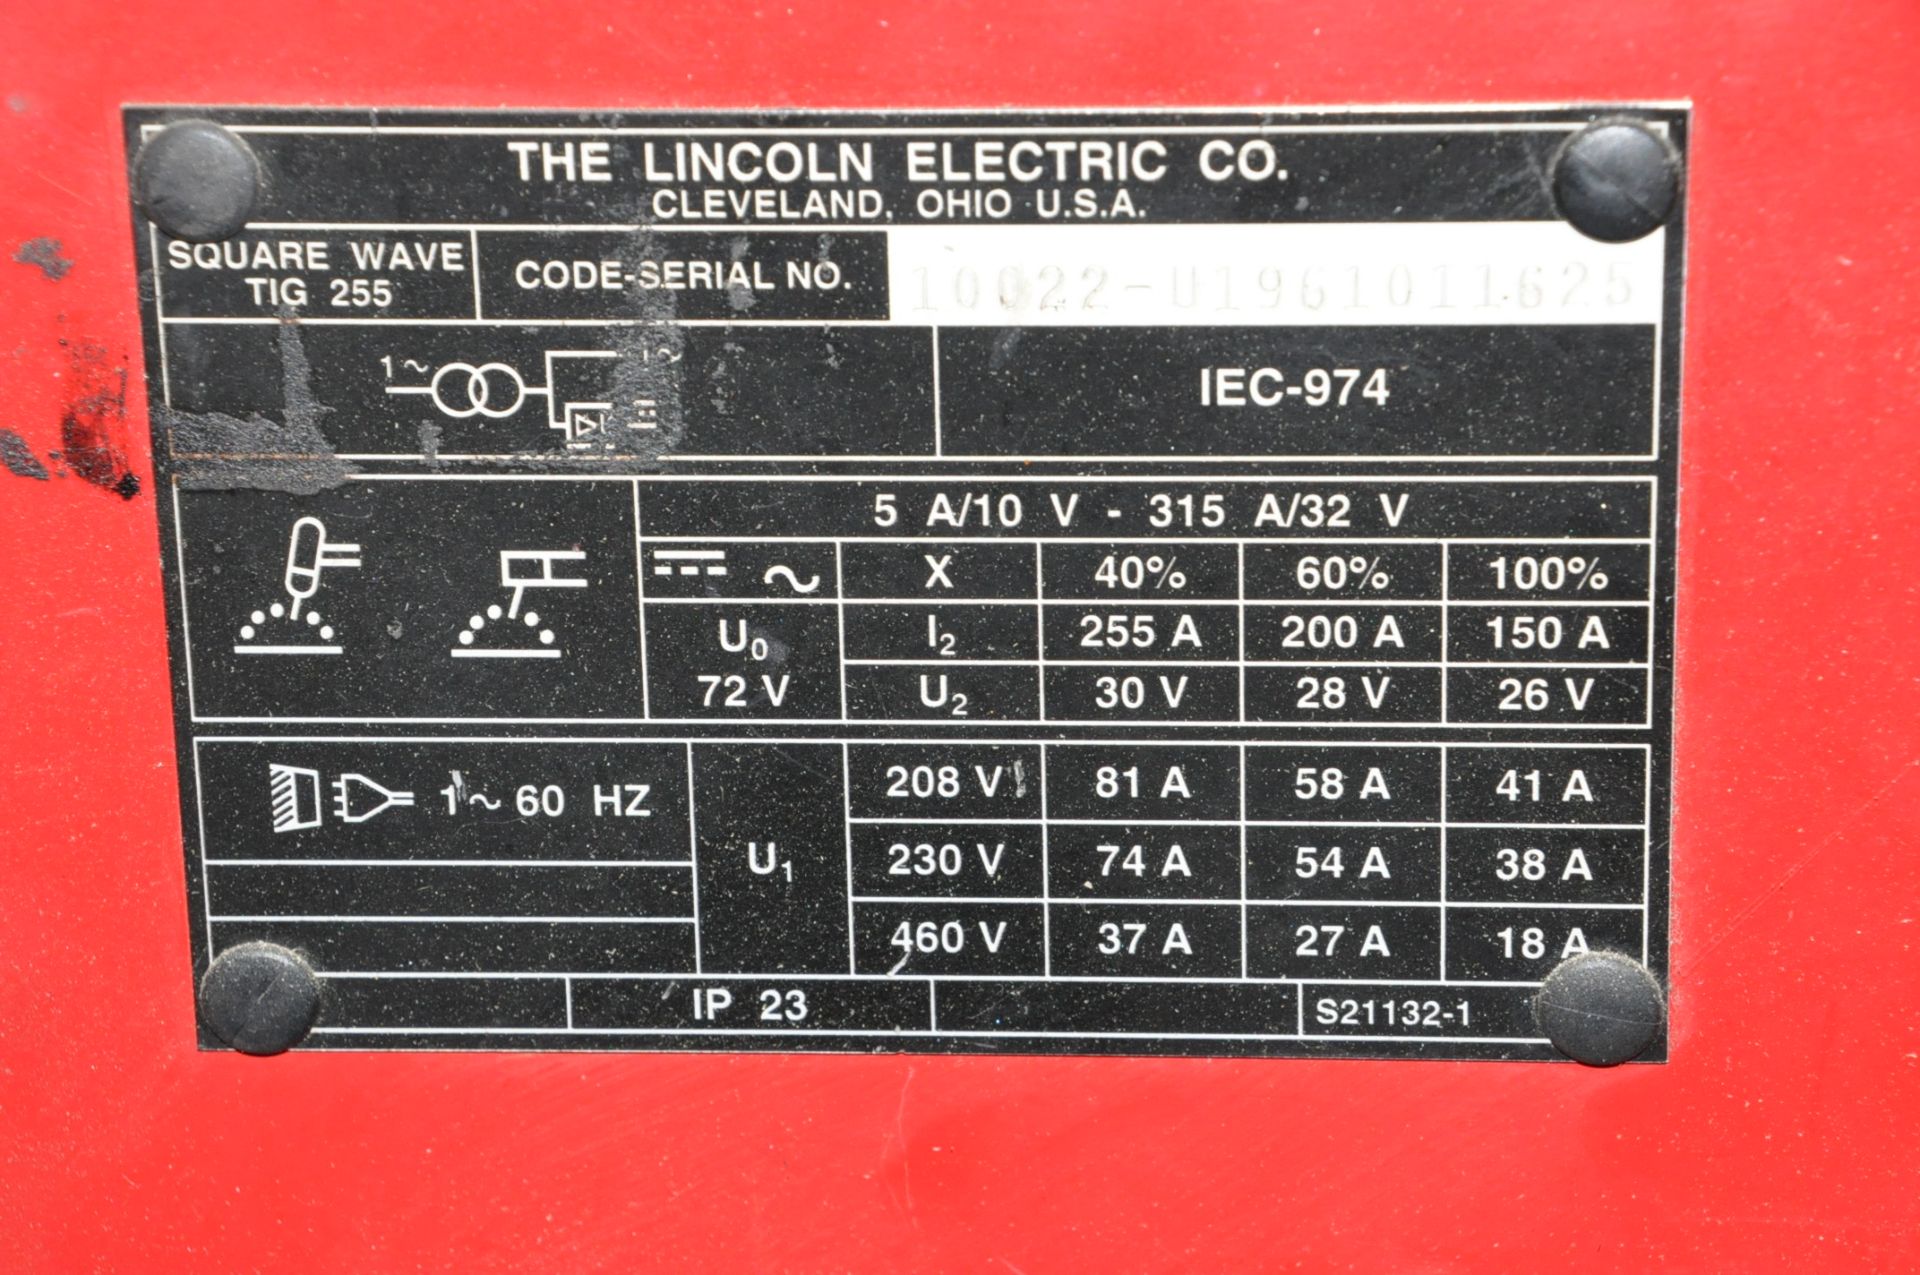 Lincoln Square Wave Tig 255, 255-Amp Capacity Tig Welder with Foot Pedal and Leads - Image 2 of 2